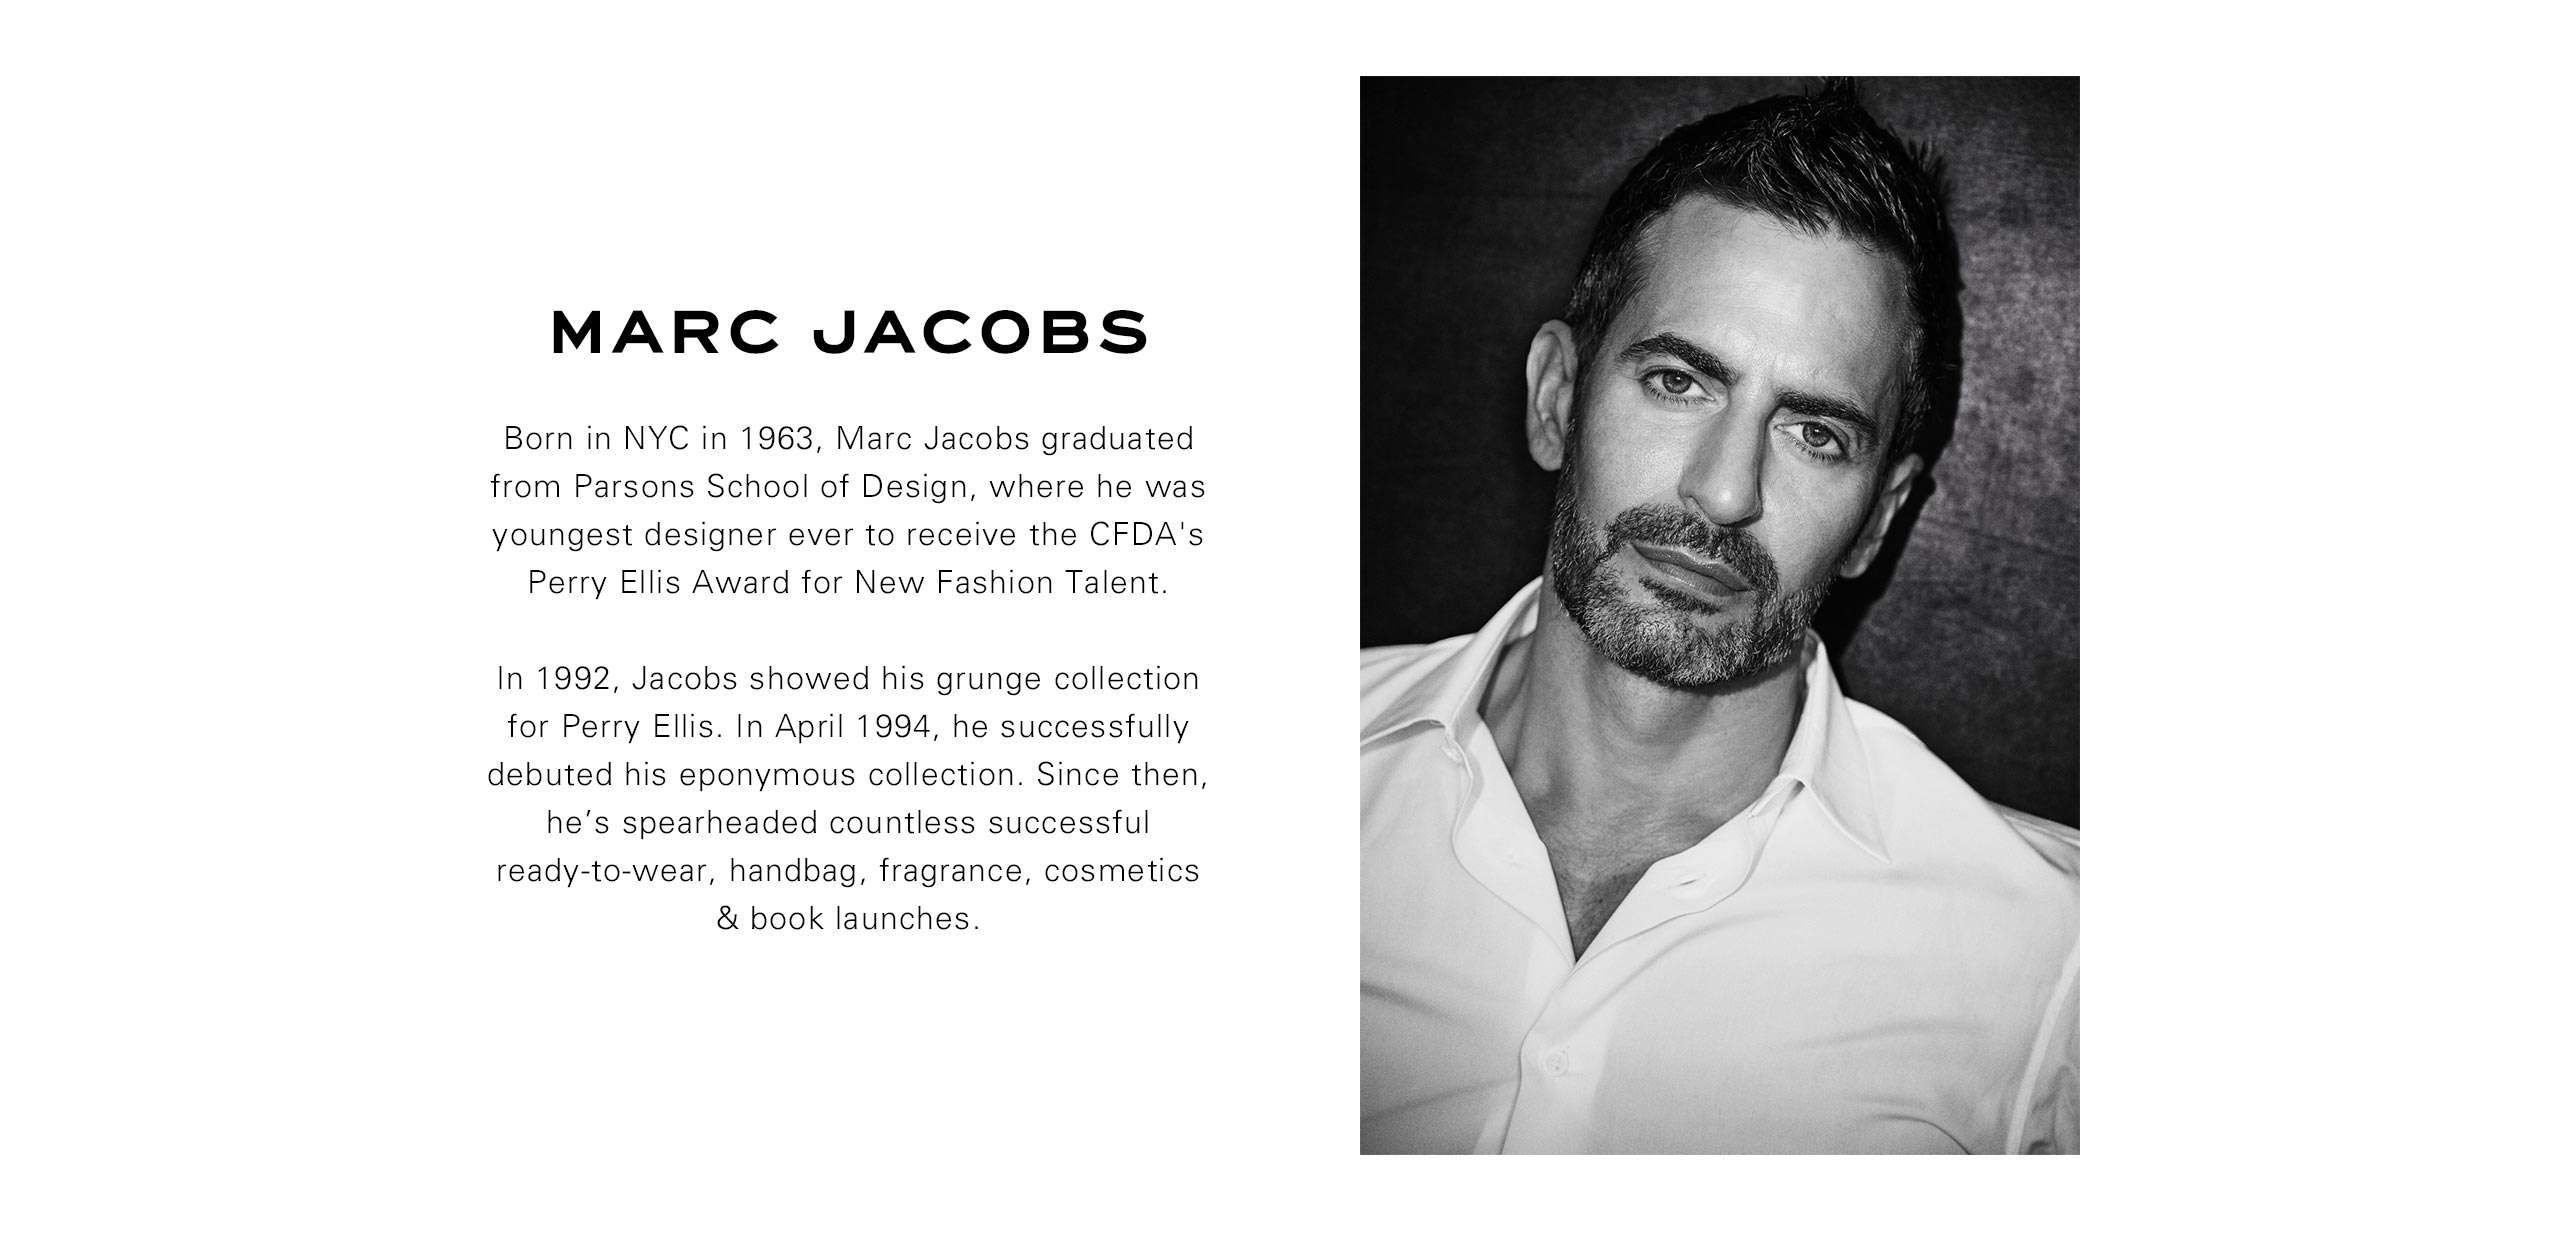 World of Marc Jacobs